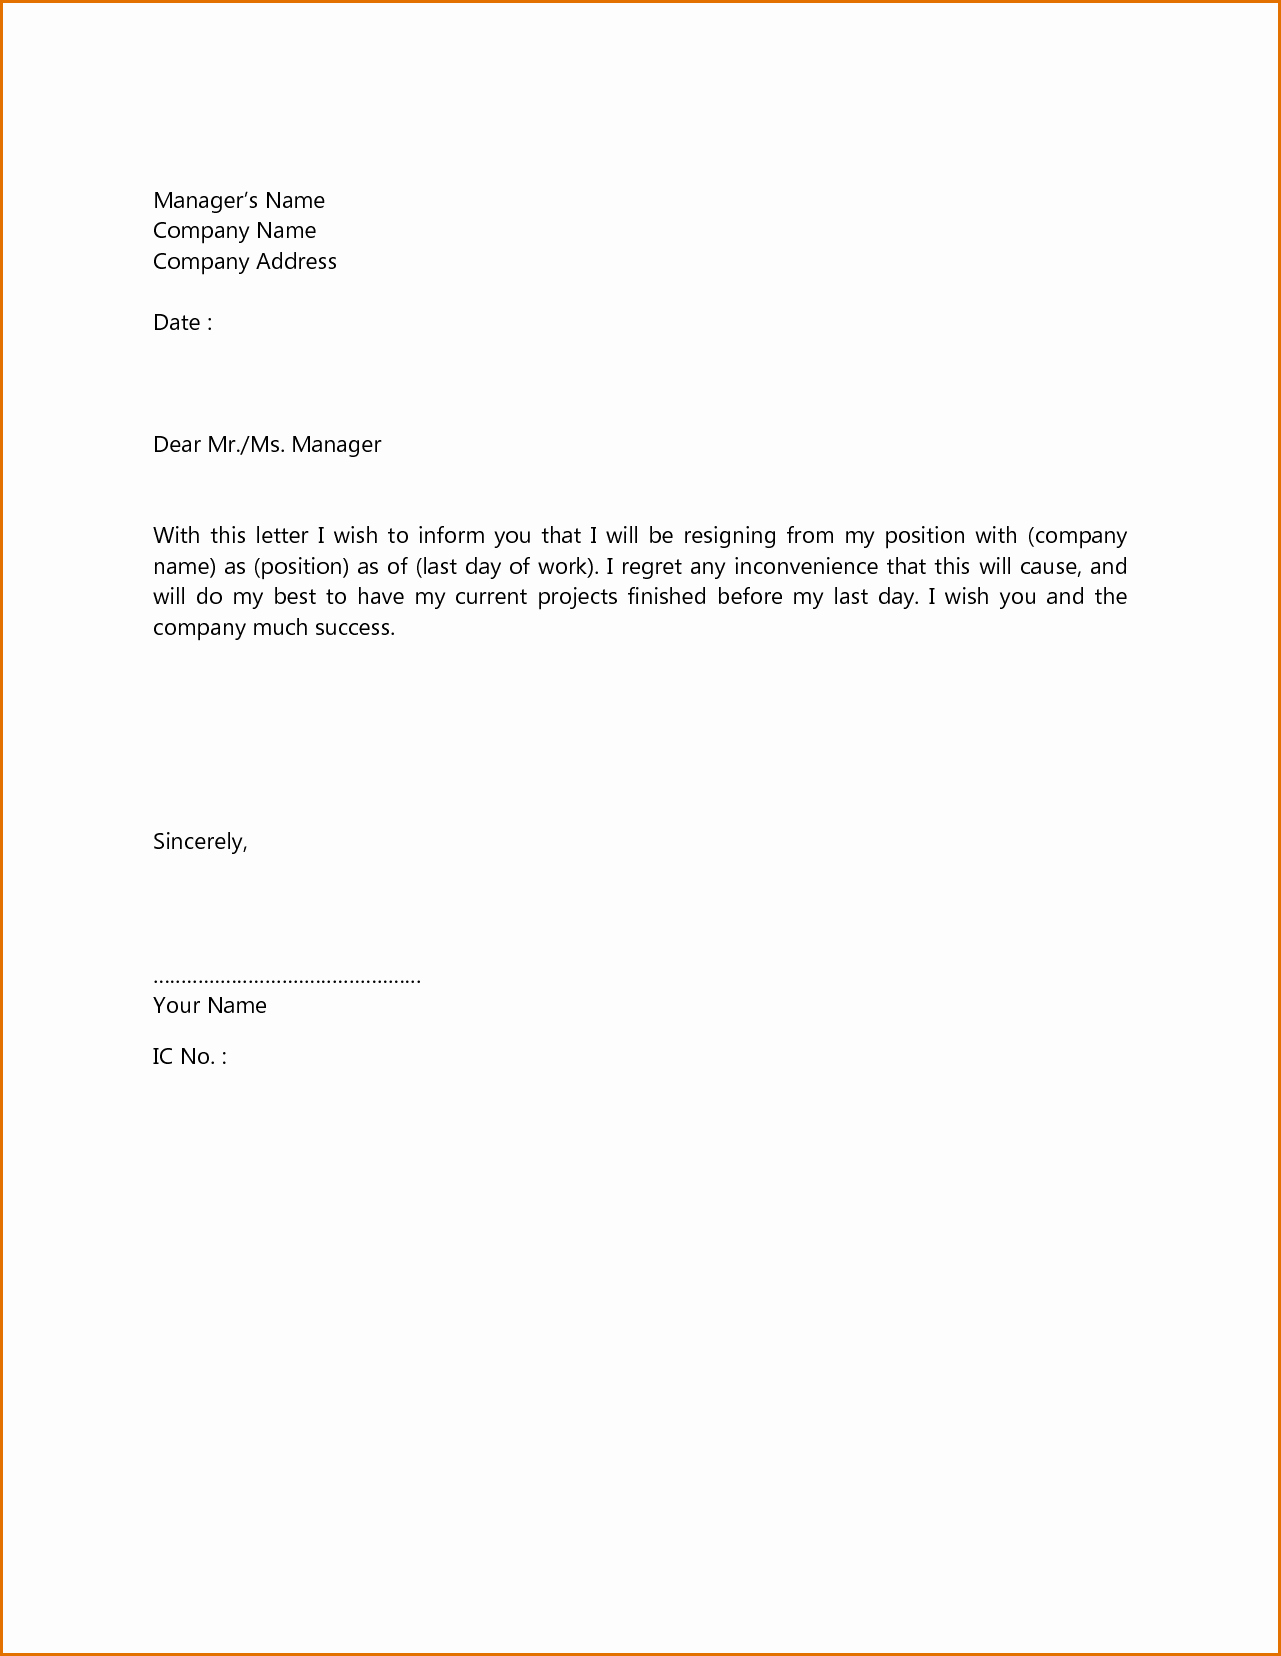 Letter Of Resignation Template Free Luxury Simple format Resignation Letter Resume Layout 2017